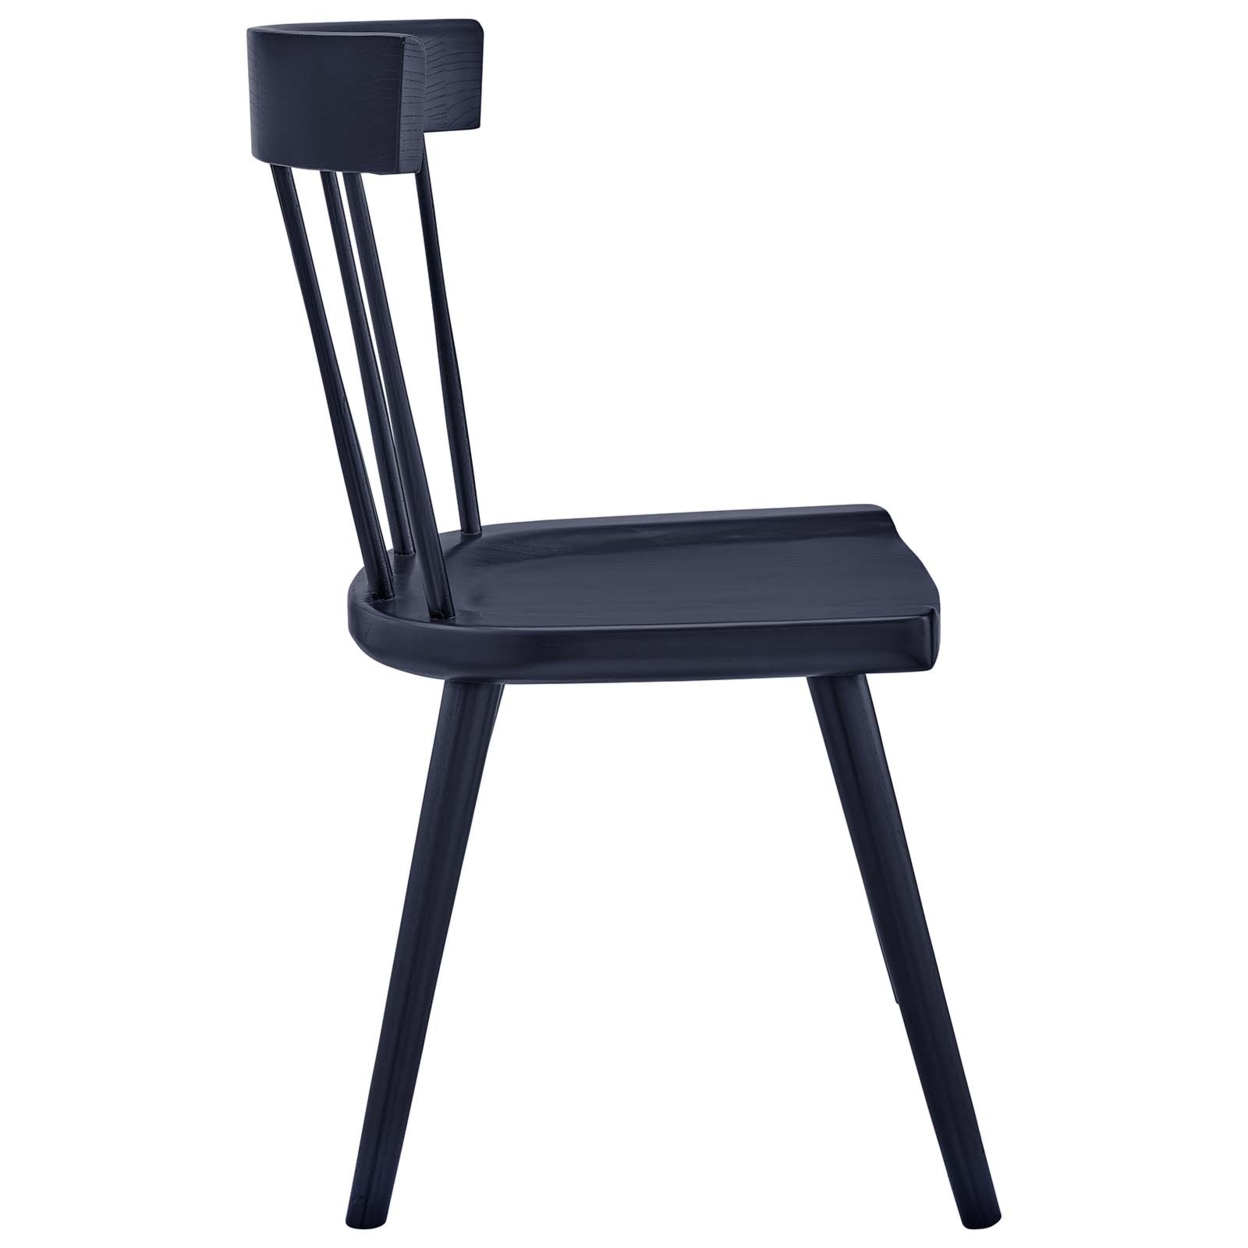 Sutter Wood Dining Side Chair Set Of 2, Midnight